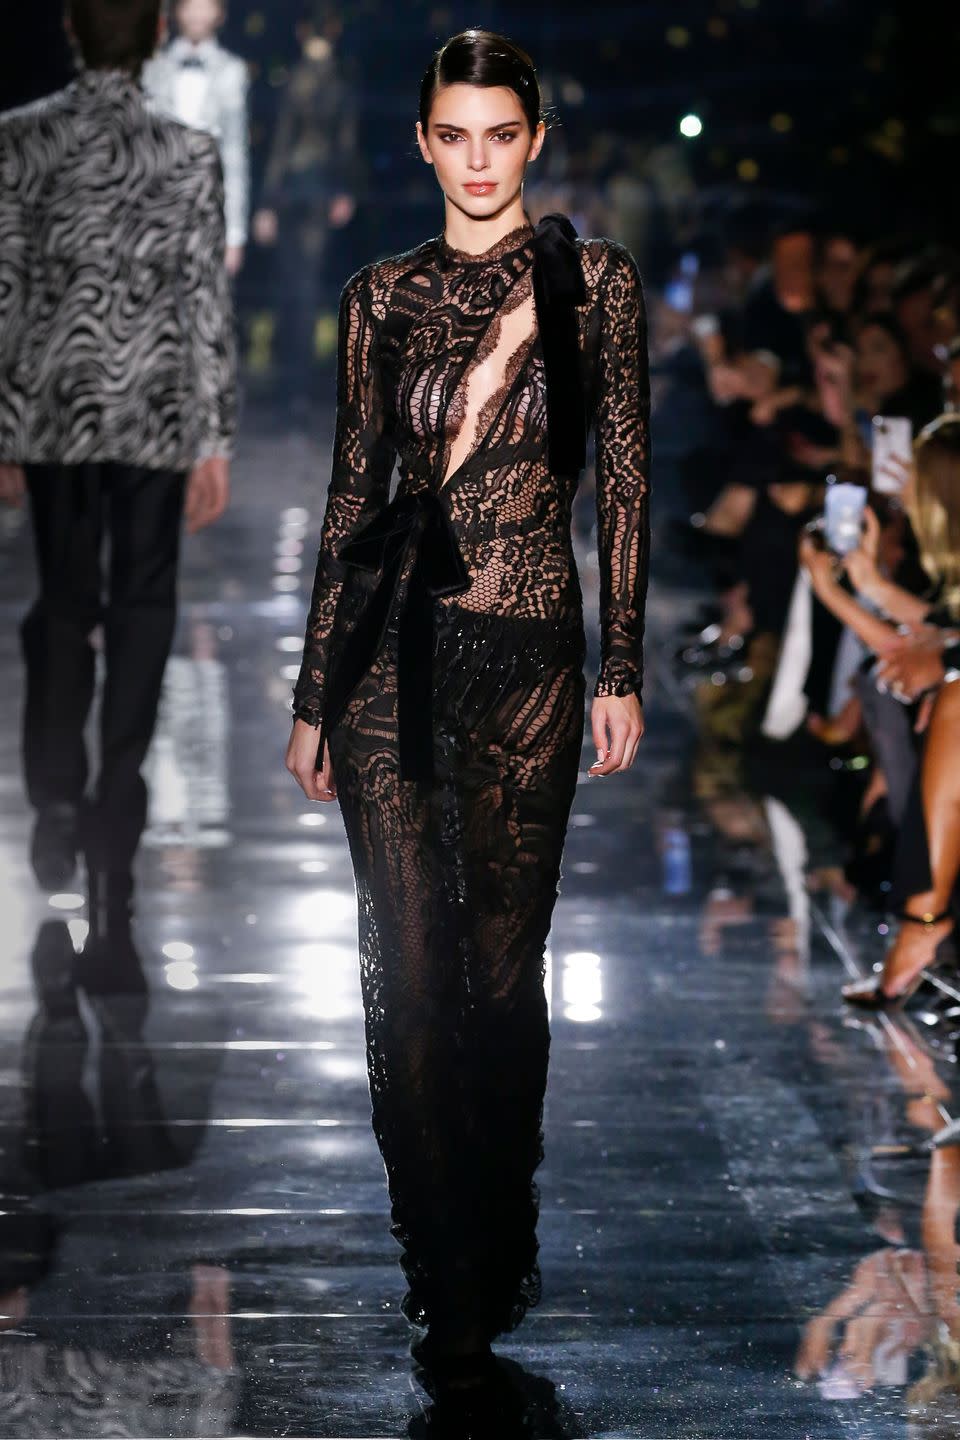 See Every Look from Tom Ford's Autumn/Winter 2020 Show